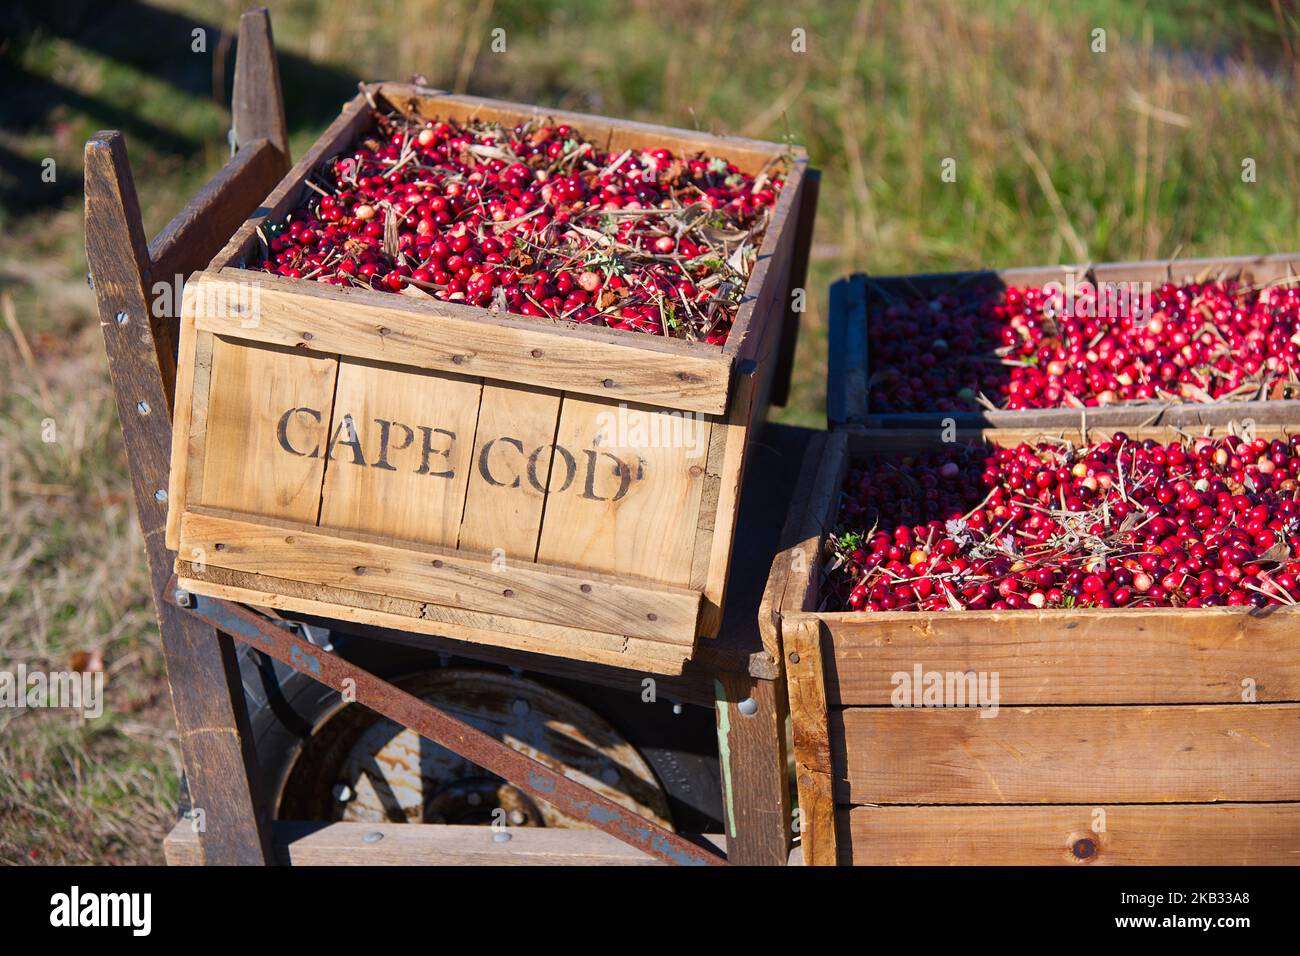 Cranberry Harvest in West Yarmouth, Massachusetts (USA) on Cape Cod. Boxes of dry harvested cranberries Stock Photo